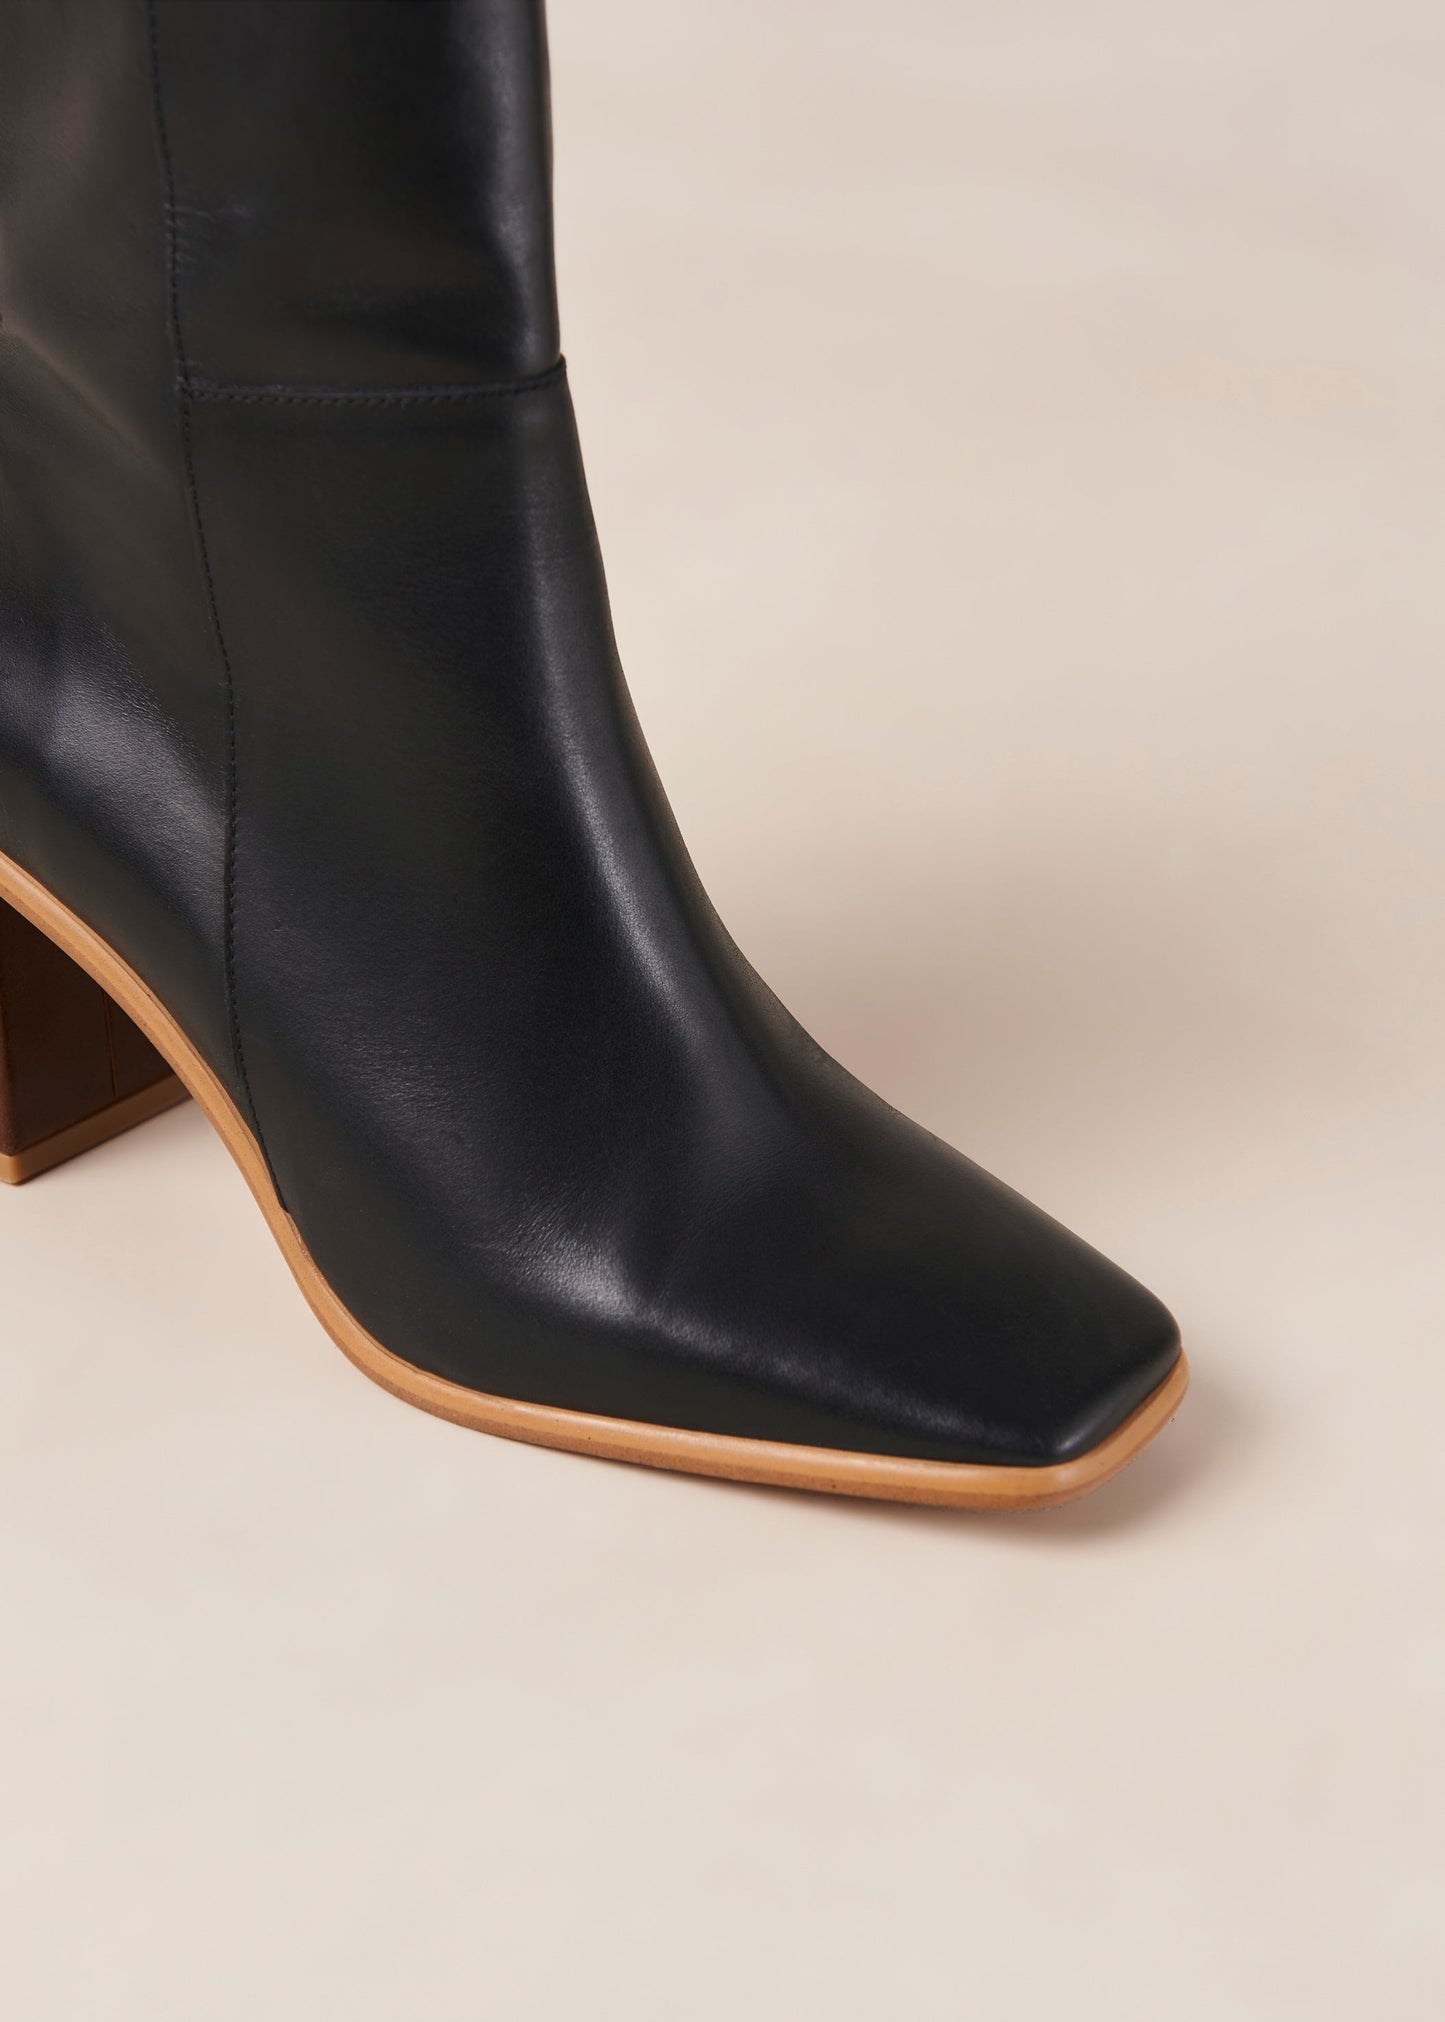 If you don’t know where to go, go West. These sustainable black boots with a block heel give off the ultimate vintage vibes. Sustainably made in Spain. Alohas West Black Vintage Leather Boot.